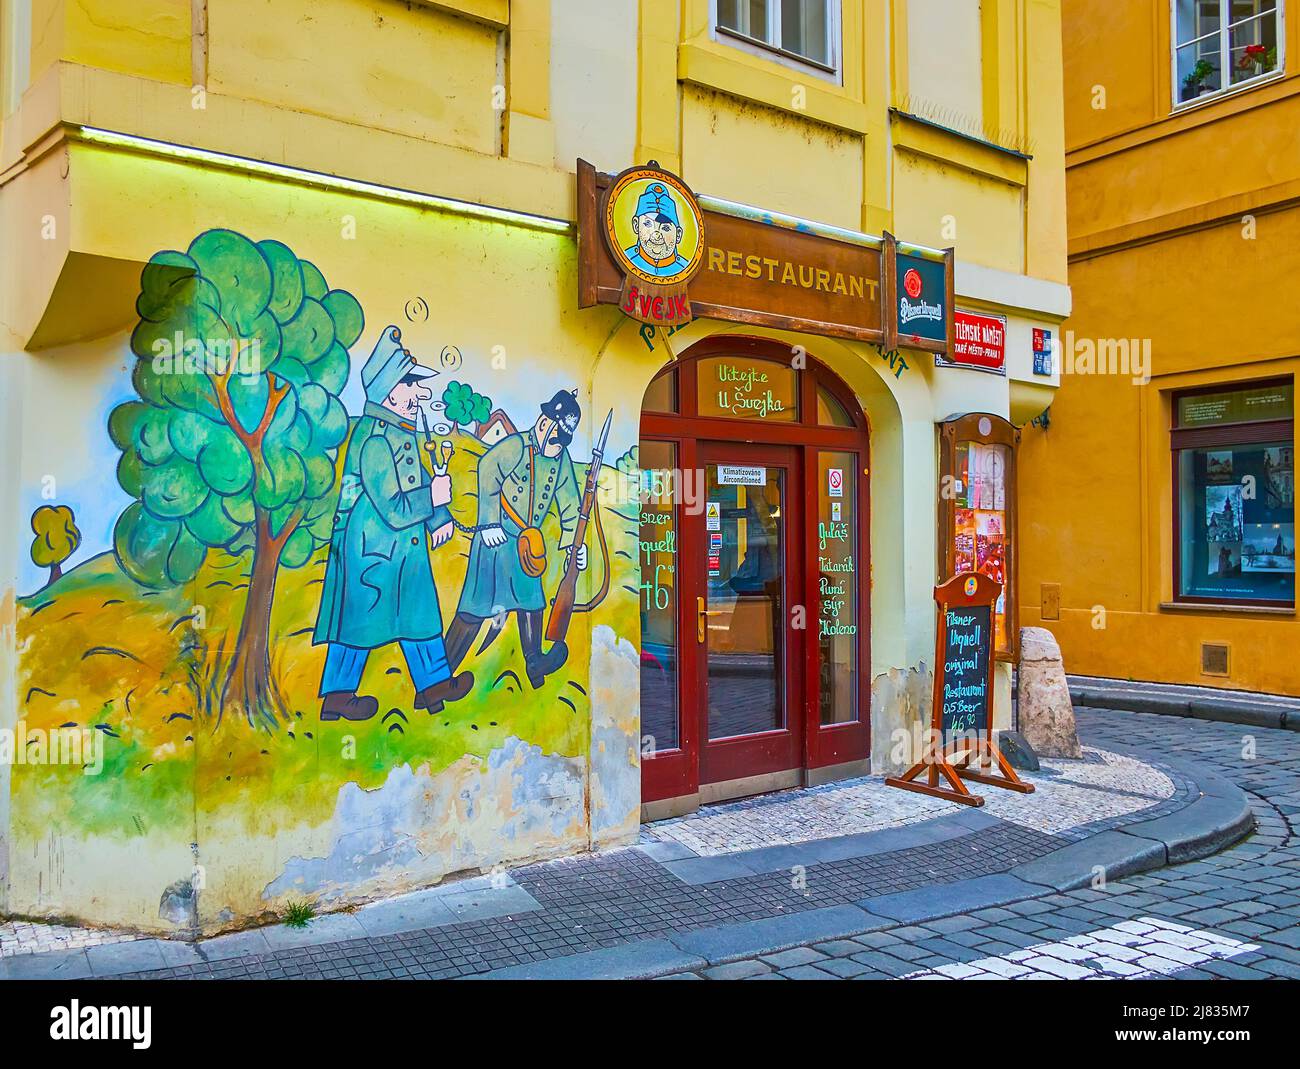 PRAGUE, CZECH REPUBLIC - MARCH 5, 2022: The facade of Svejk Restaurant on Bethlehem Square, decorated with colorful murals, on March 5 in Prague Stock Photo